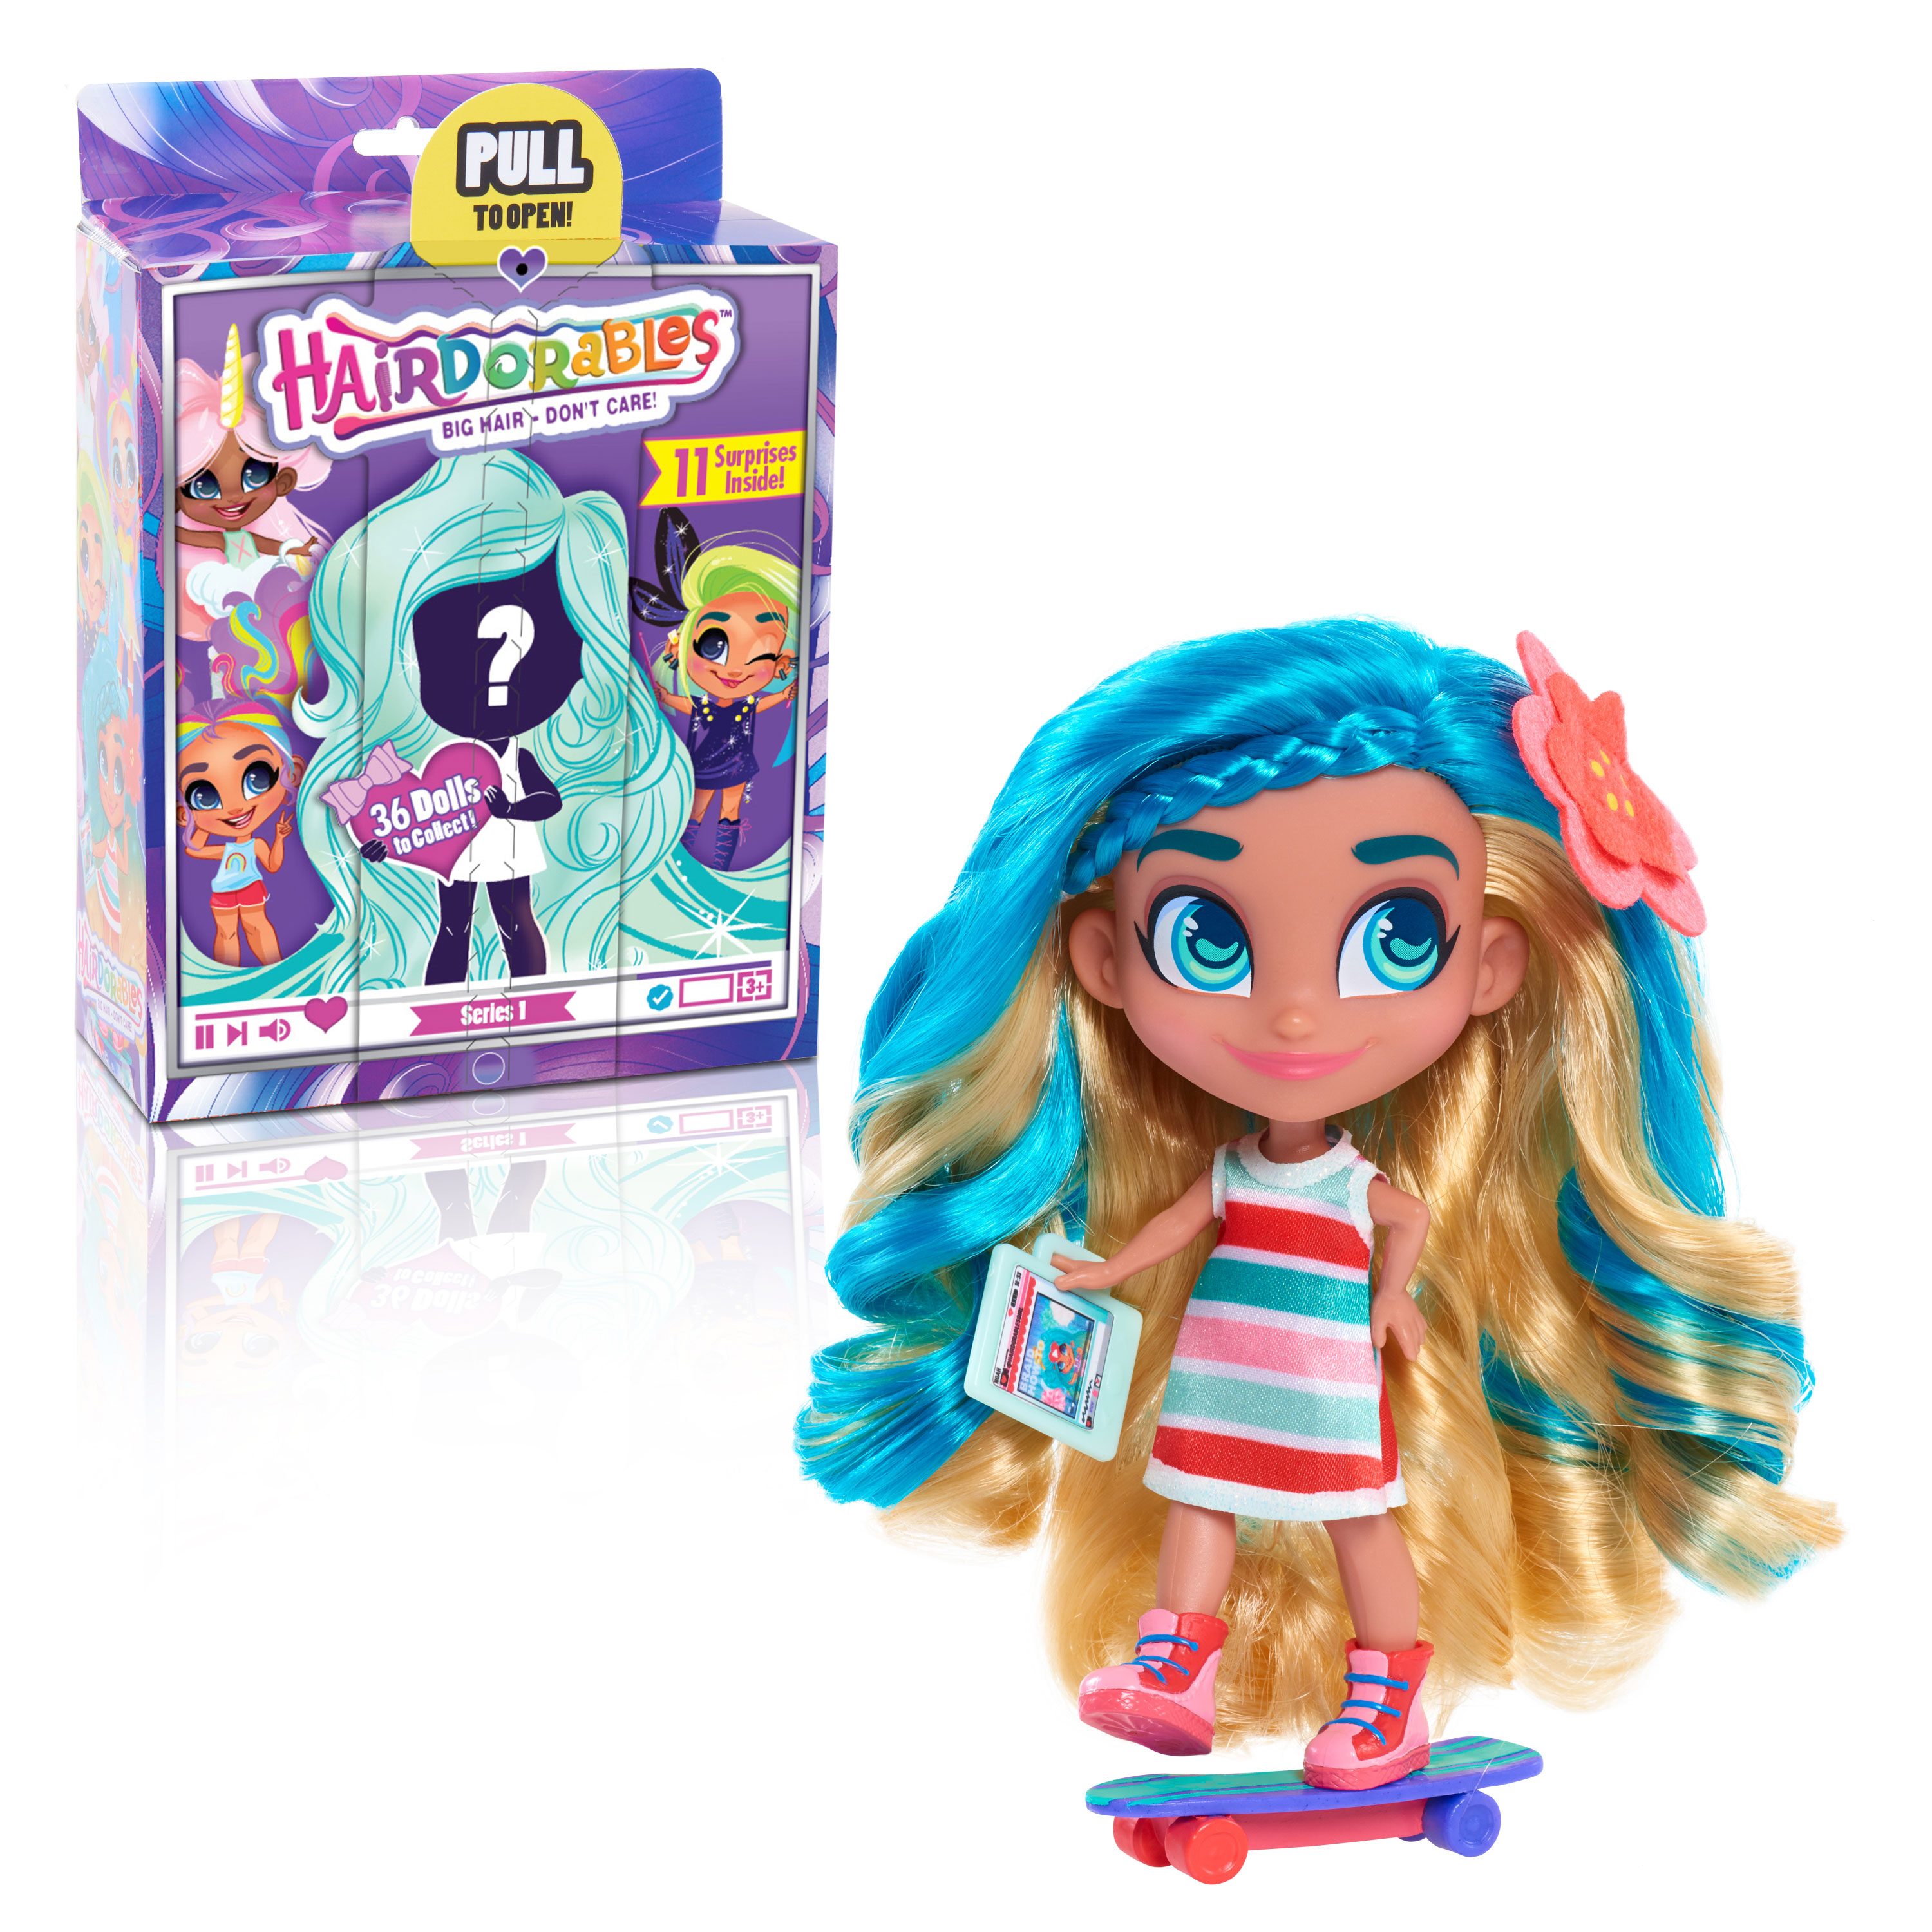 Hairdorables Dolls - Style May Vary 